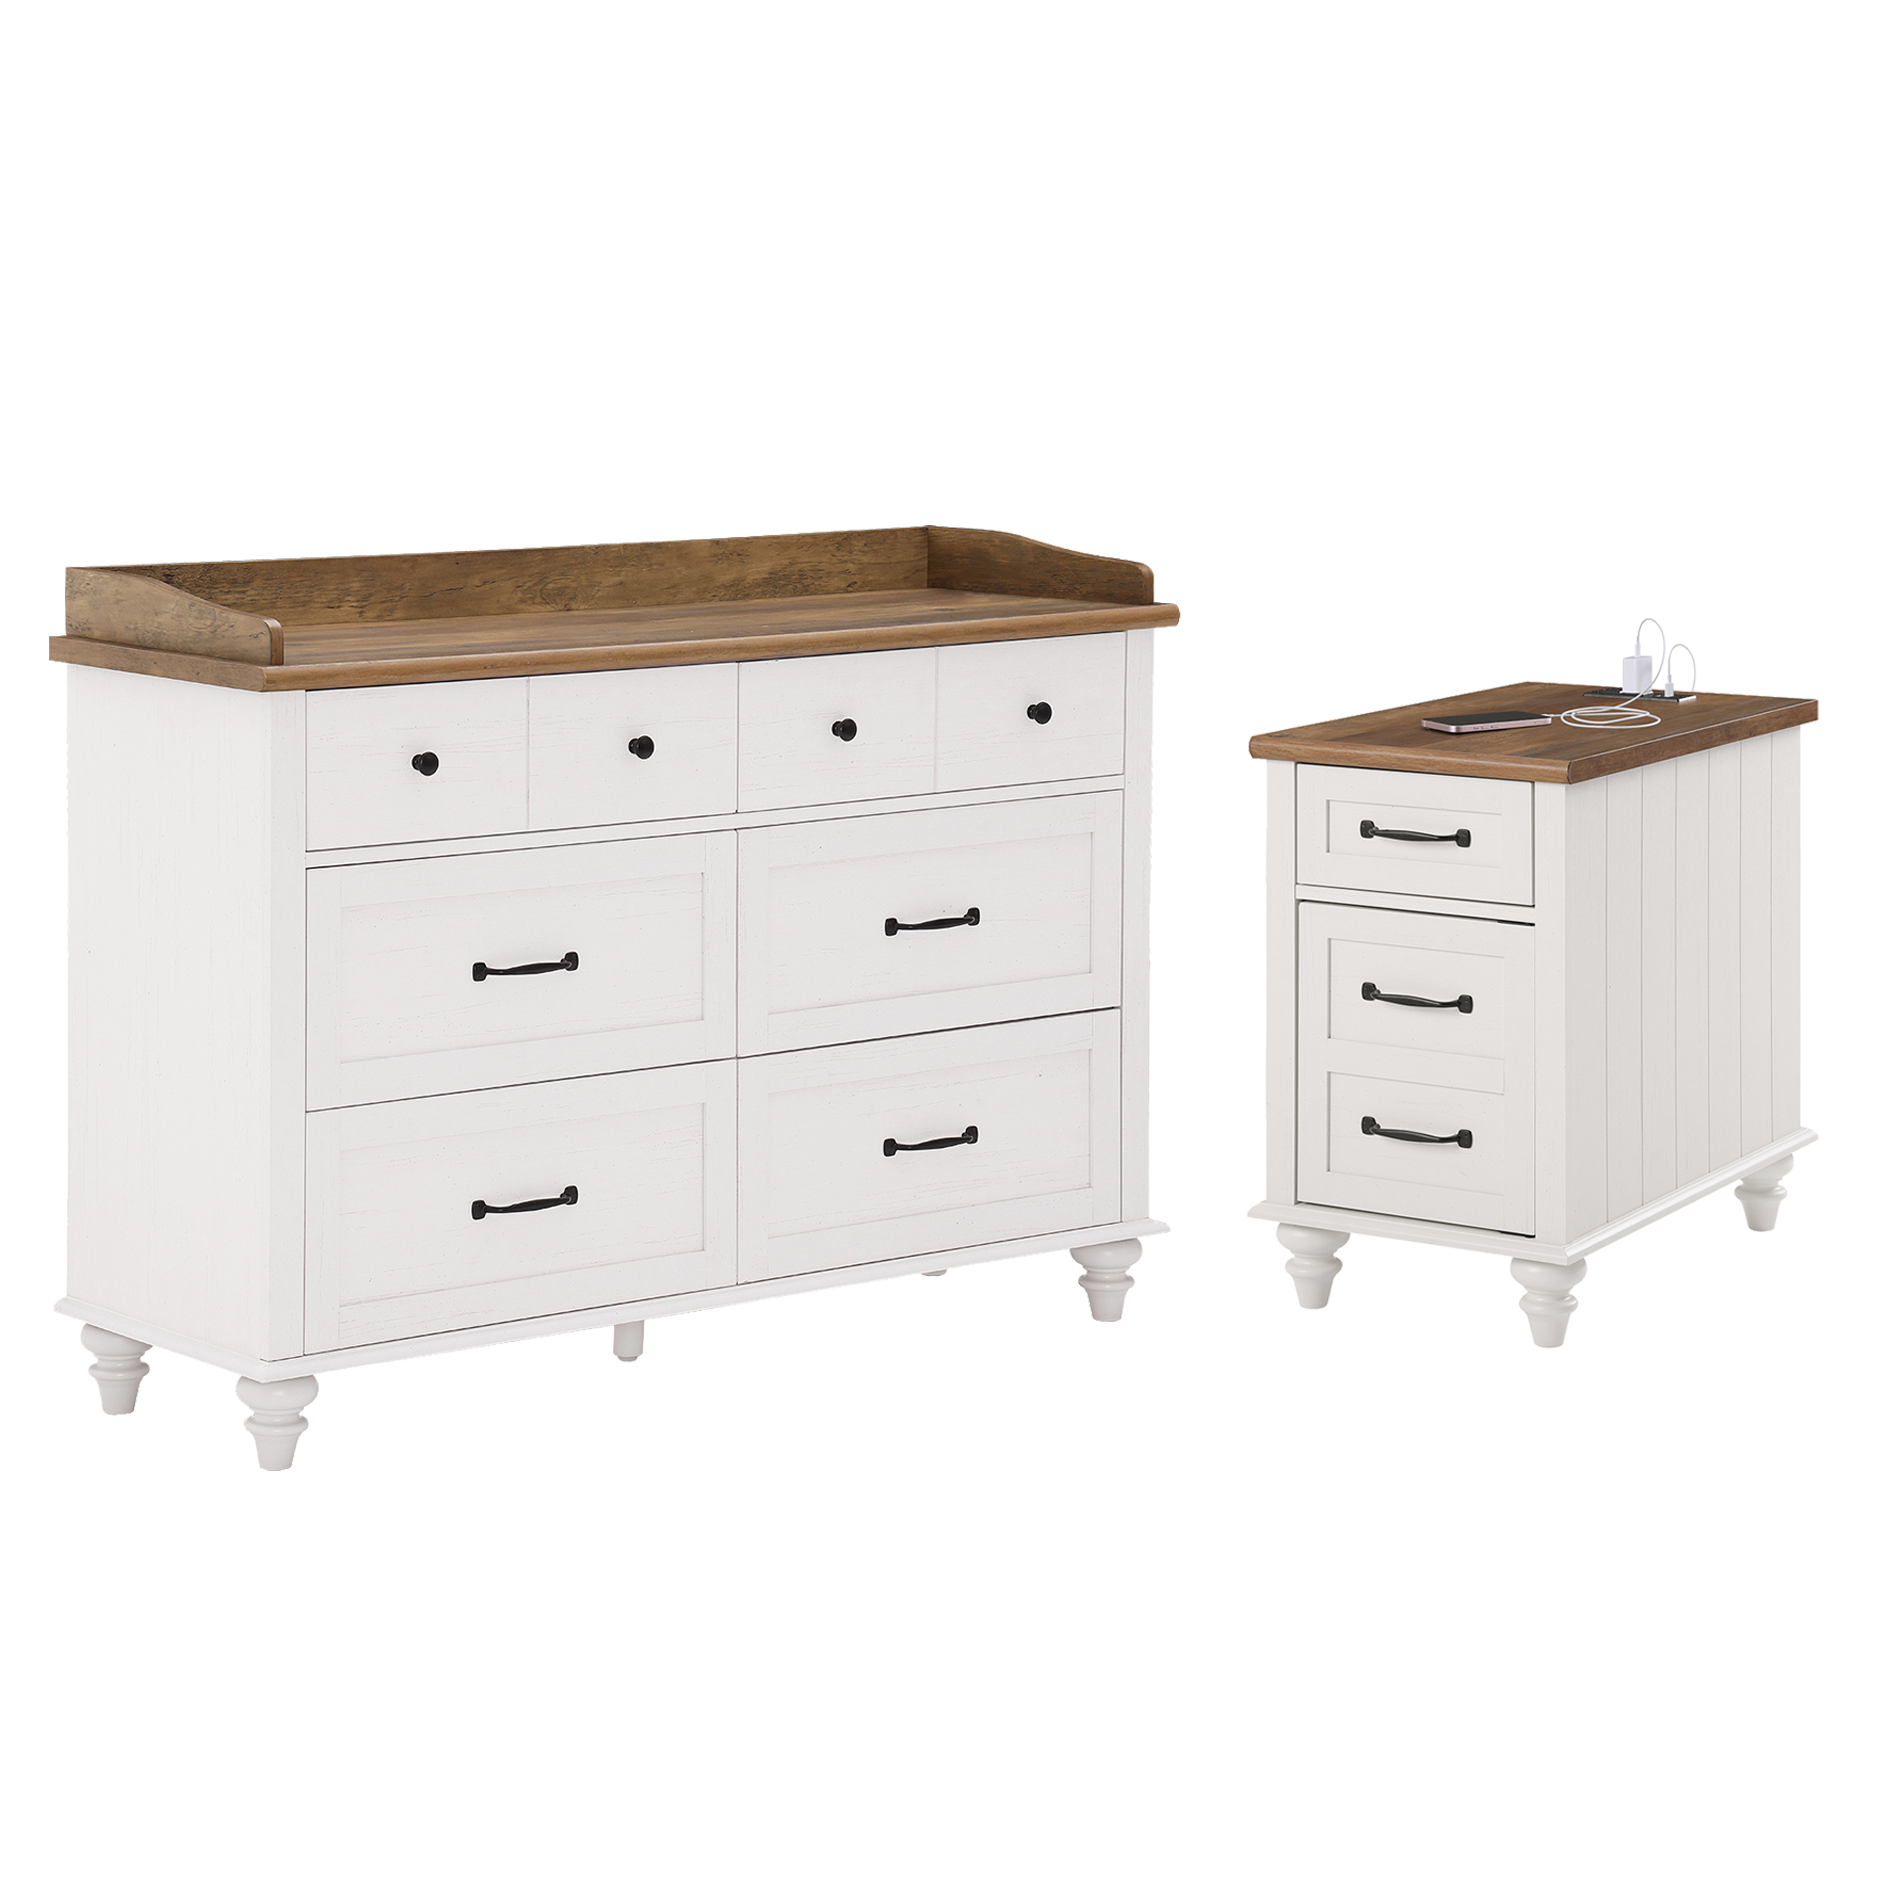 WAMPAT 47" Baby Dresser for Nursery with 6 Drawers, Changing Table for Baby, White